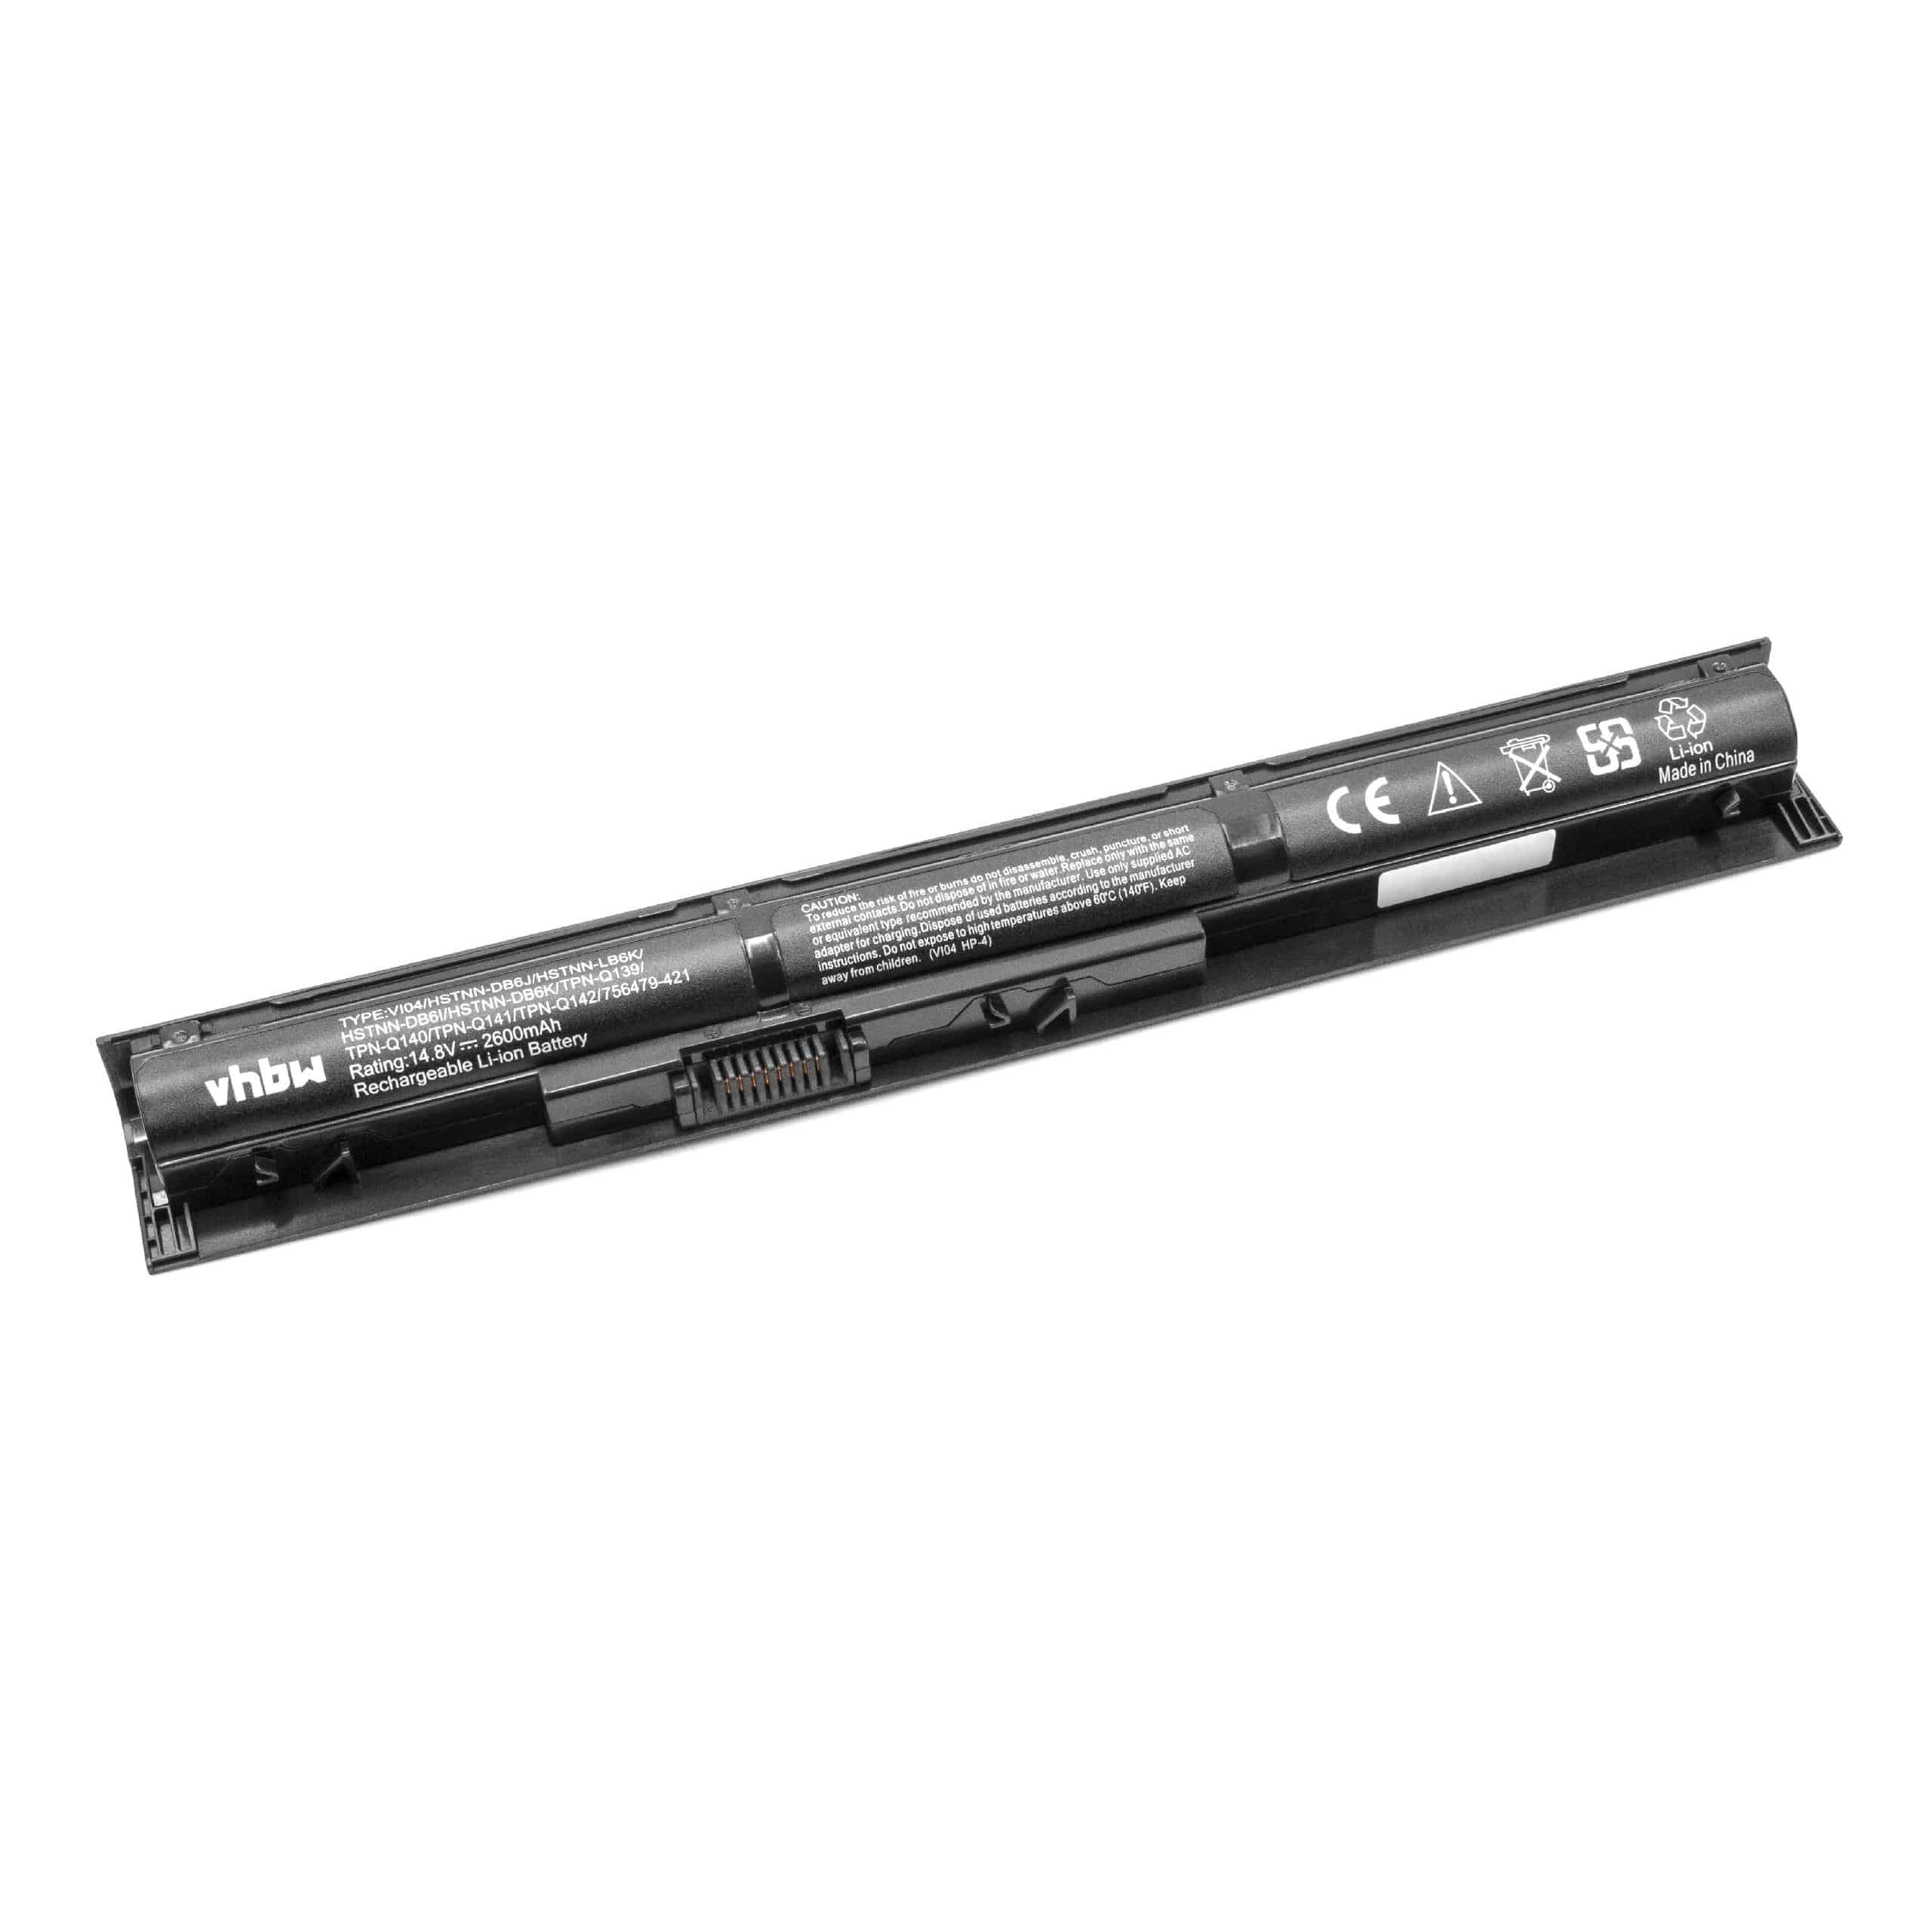 Notebook Battery Replacement for HP 756744-001, 756478-421, 756478-541, 756479-421 - 2600mAh 14.4V Li-Ion